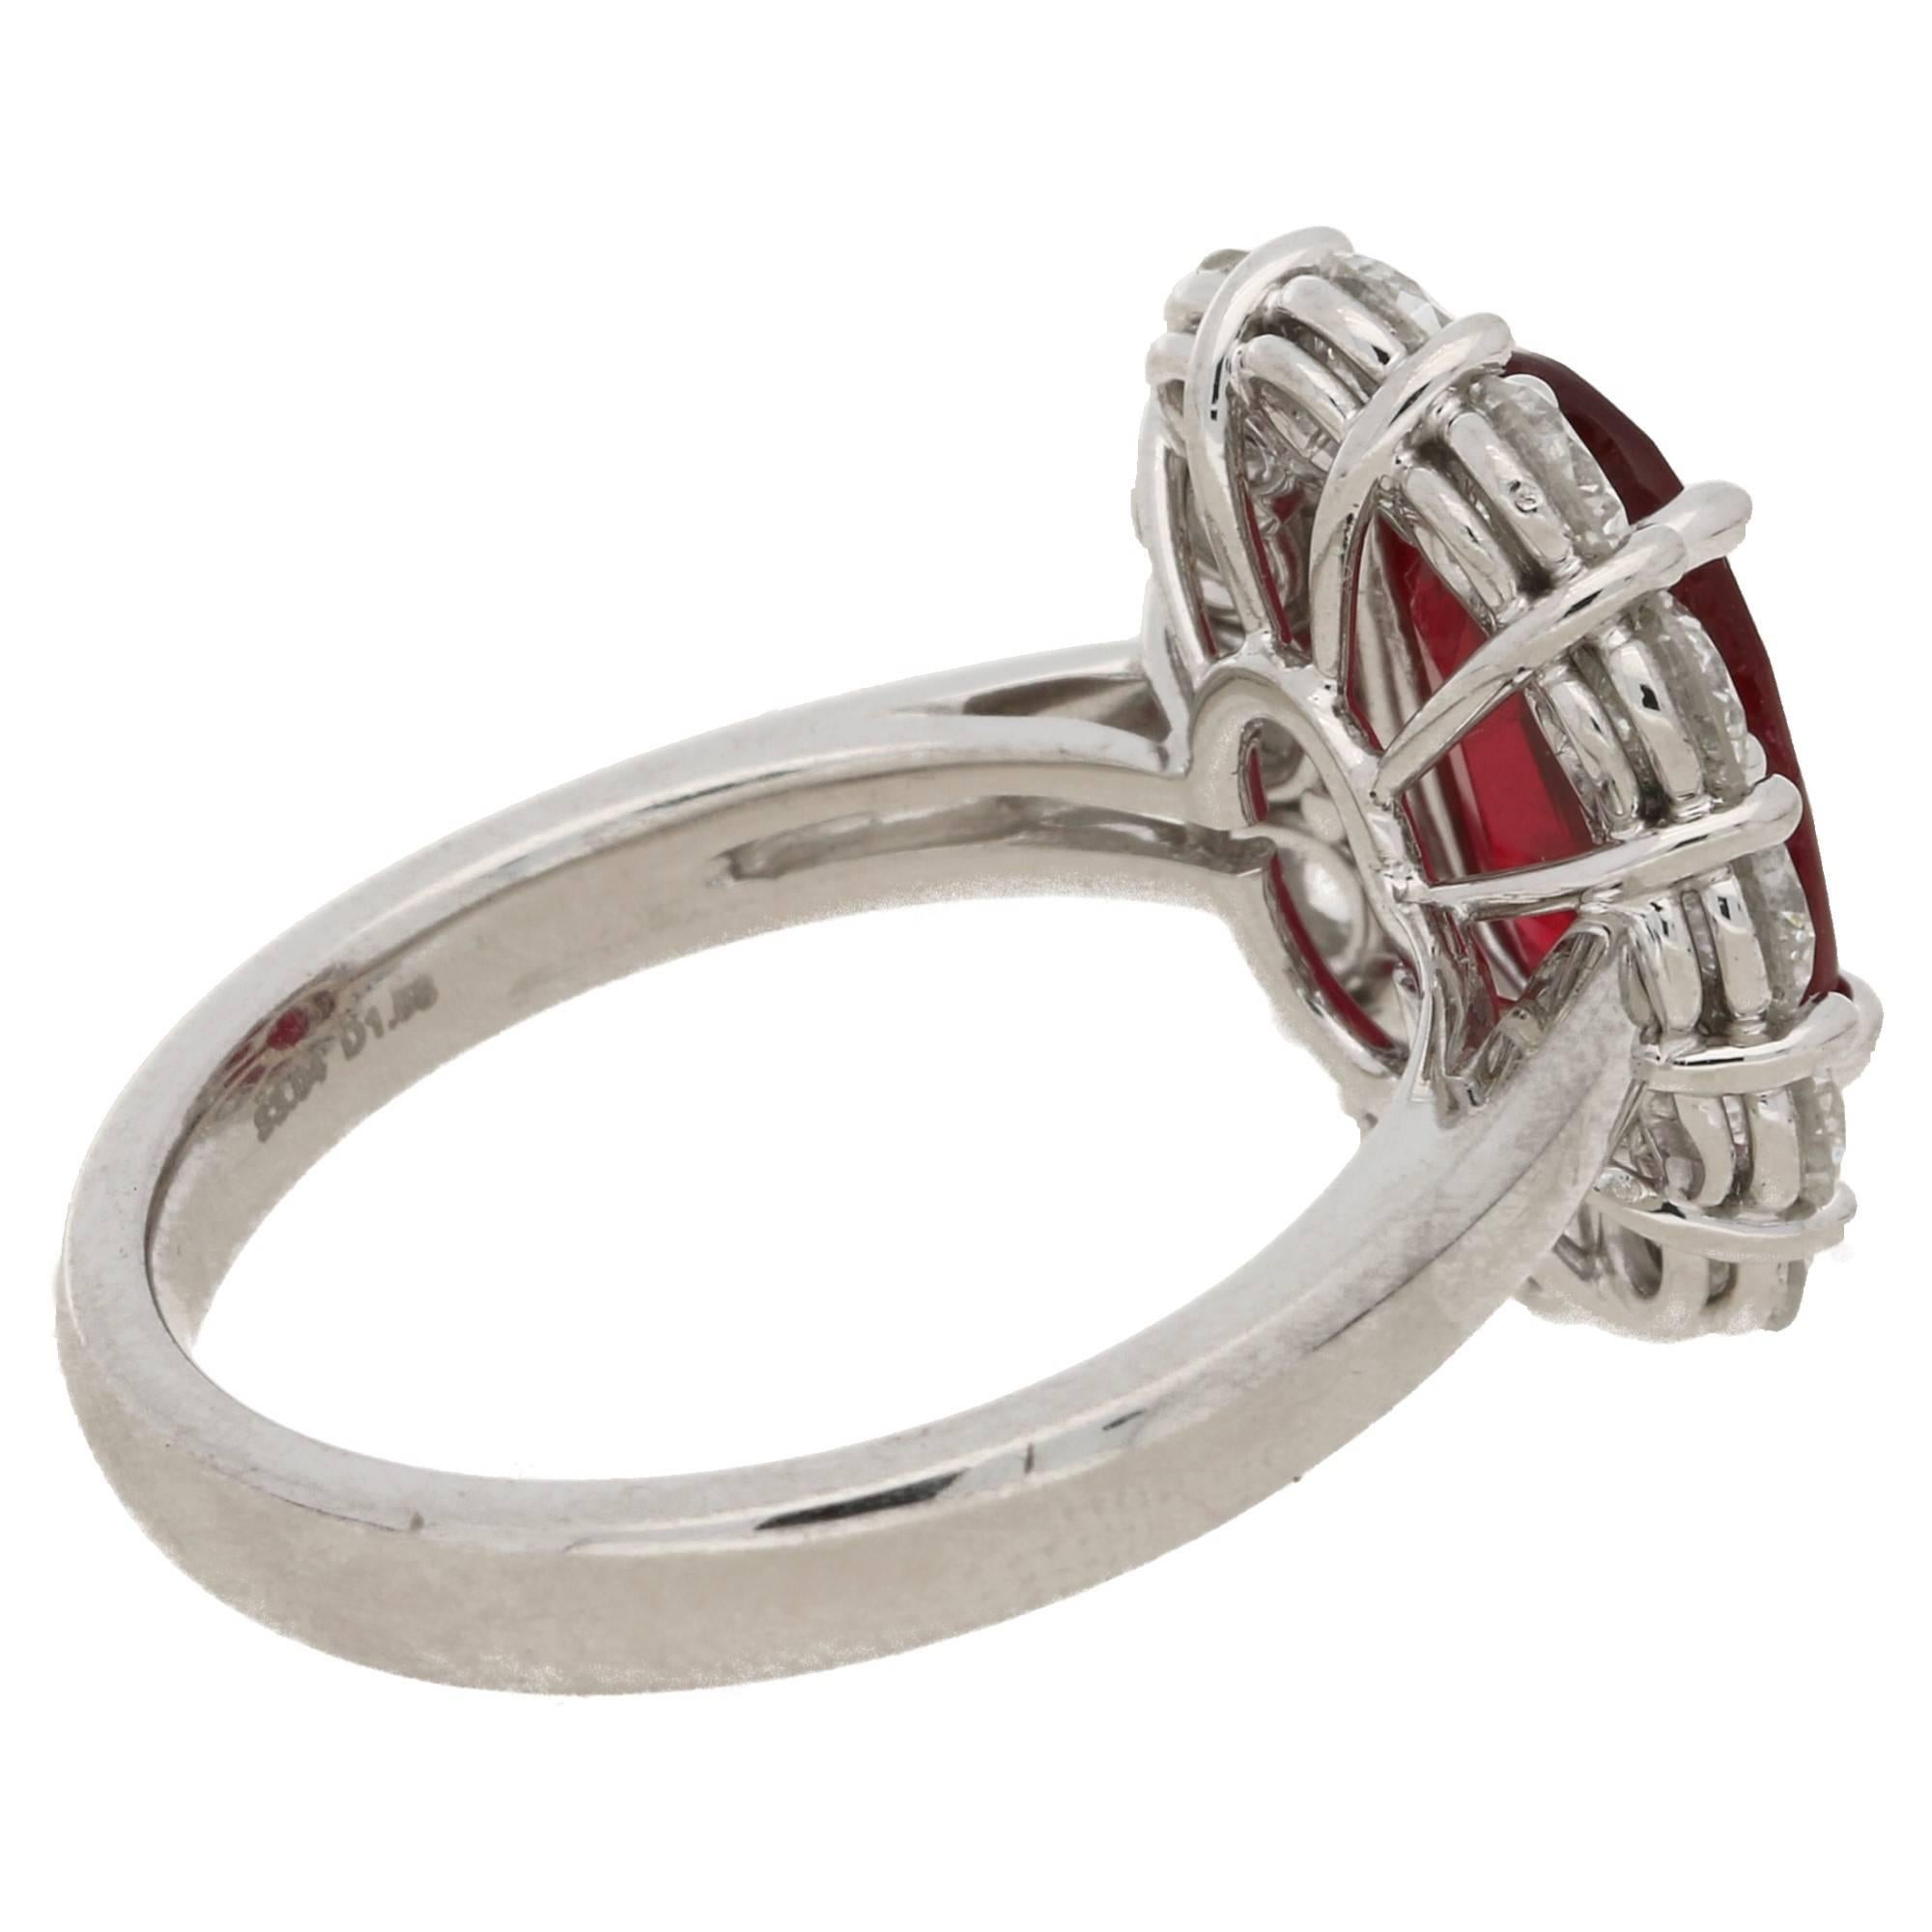 A classic oval ruby and diamond cluster ring set in platinum. The central long oval ruby is four-claw set in platinum amidst a border of twelve round brilliant cut diamonds mounted in a four-claw low impact setting, allowing the edge of the diamond